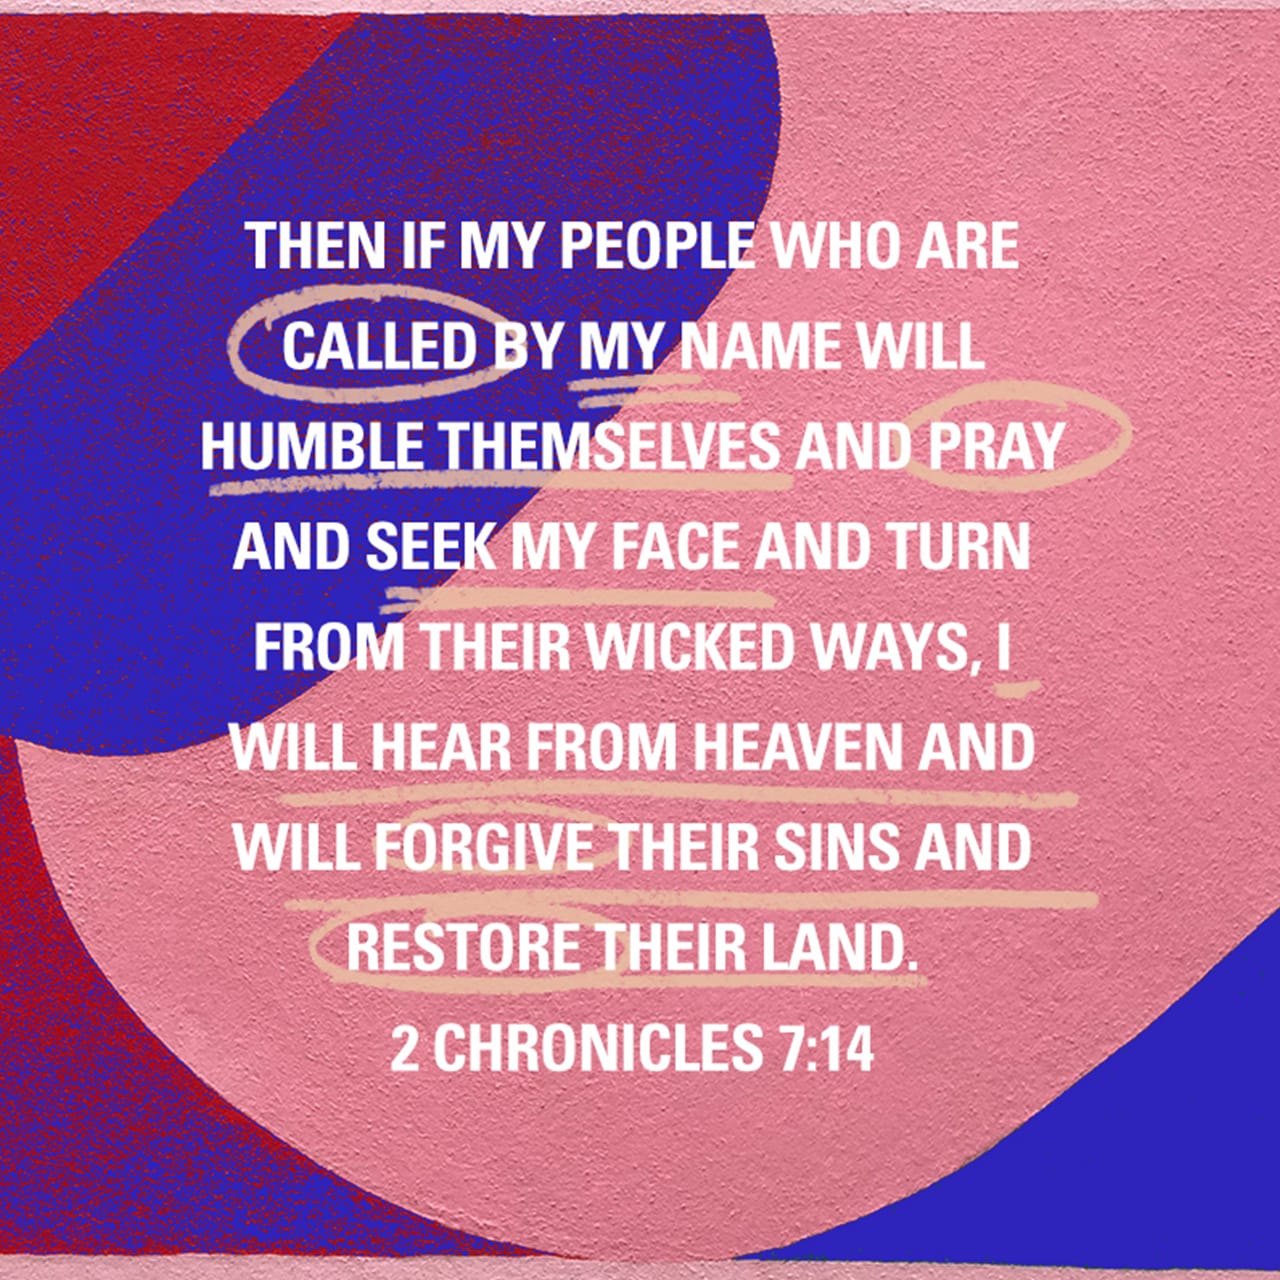 2 Chronicles 7:14 Then if my people who are called by my name will humble themselves and pray and seek my face and turn from their wicked ways, I will hear from heaven and will forgive their sins and restore their land.